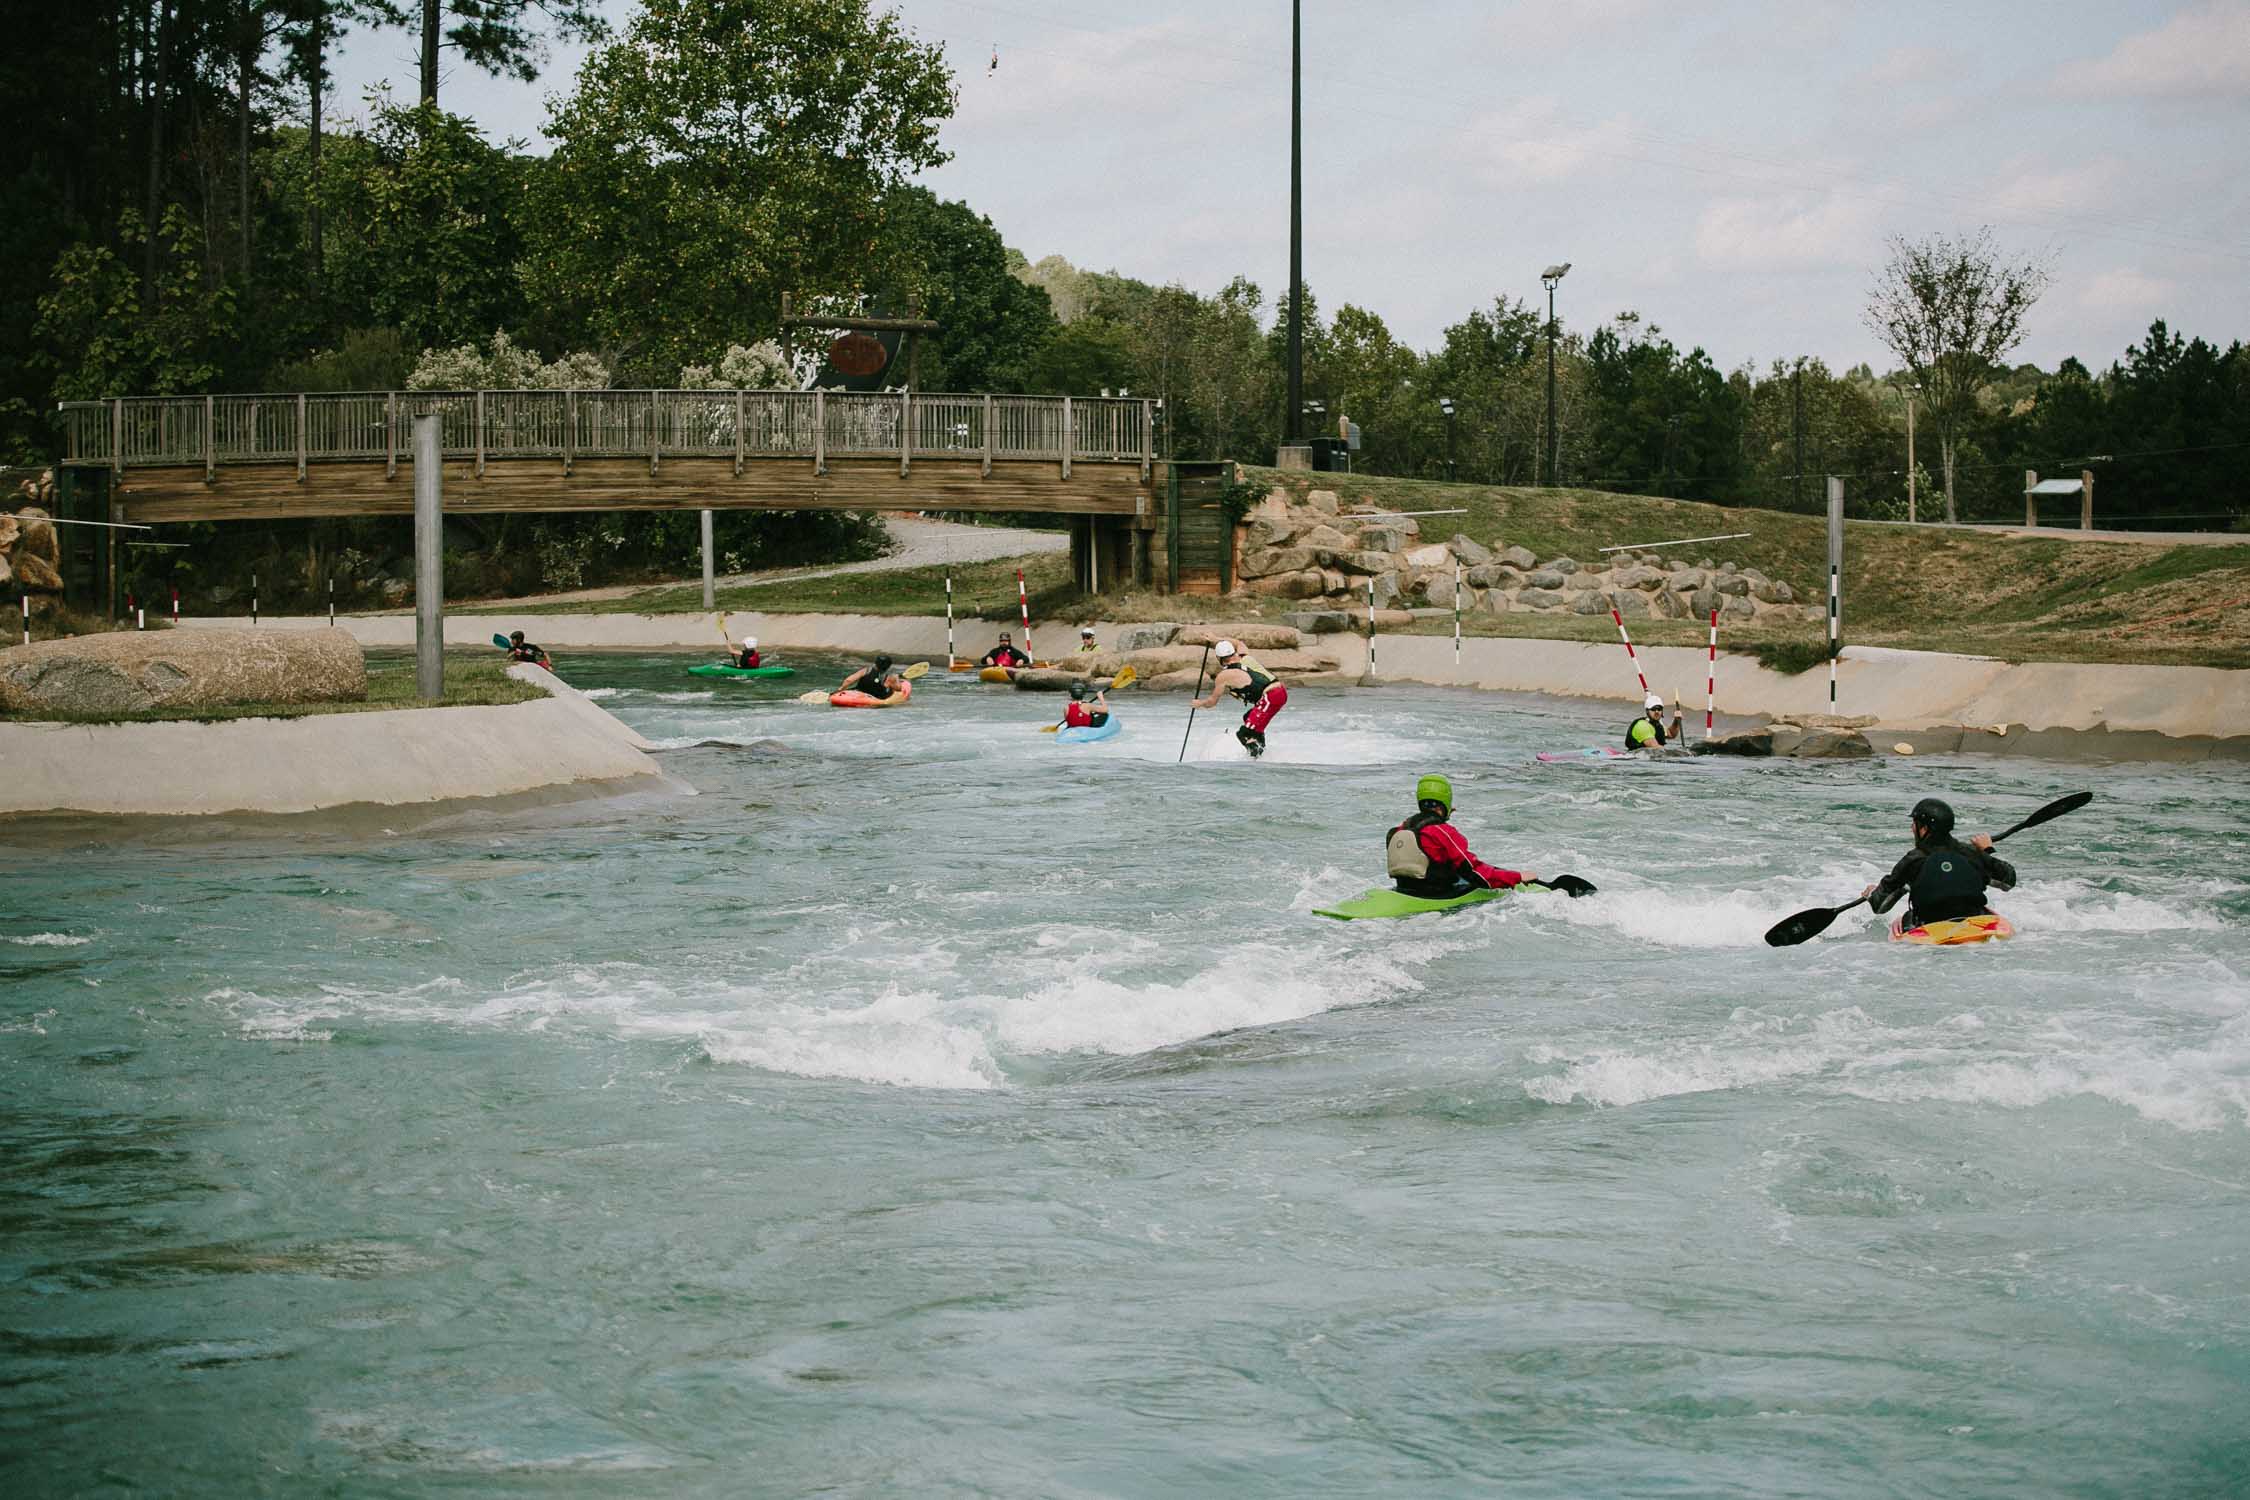 US National Whitewater Center, view of the river with people kayaking and paddle boarding.